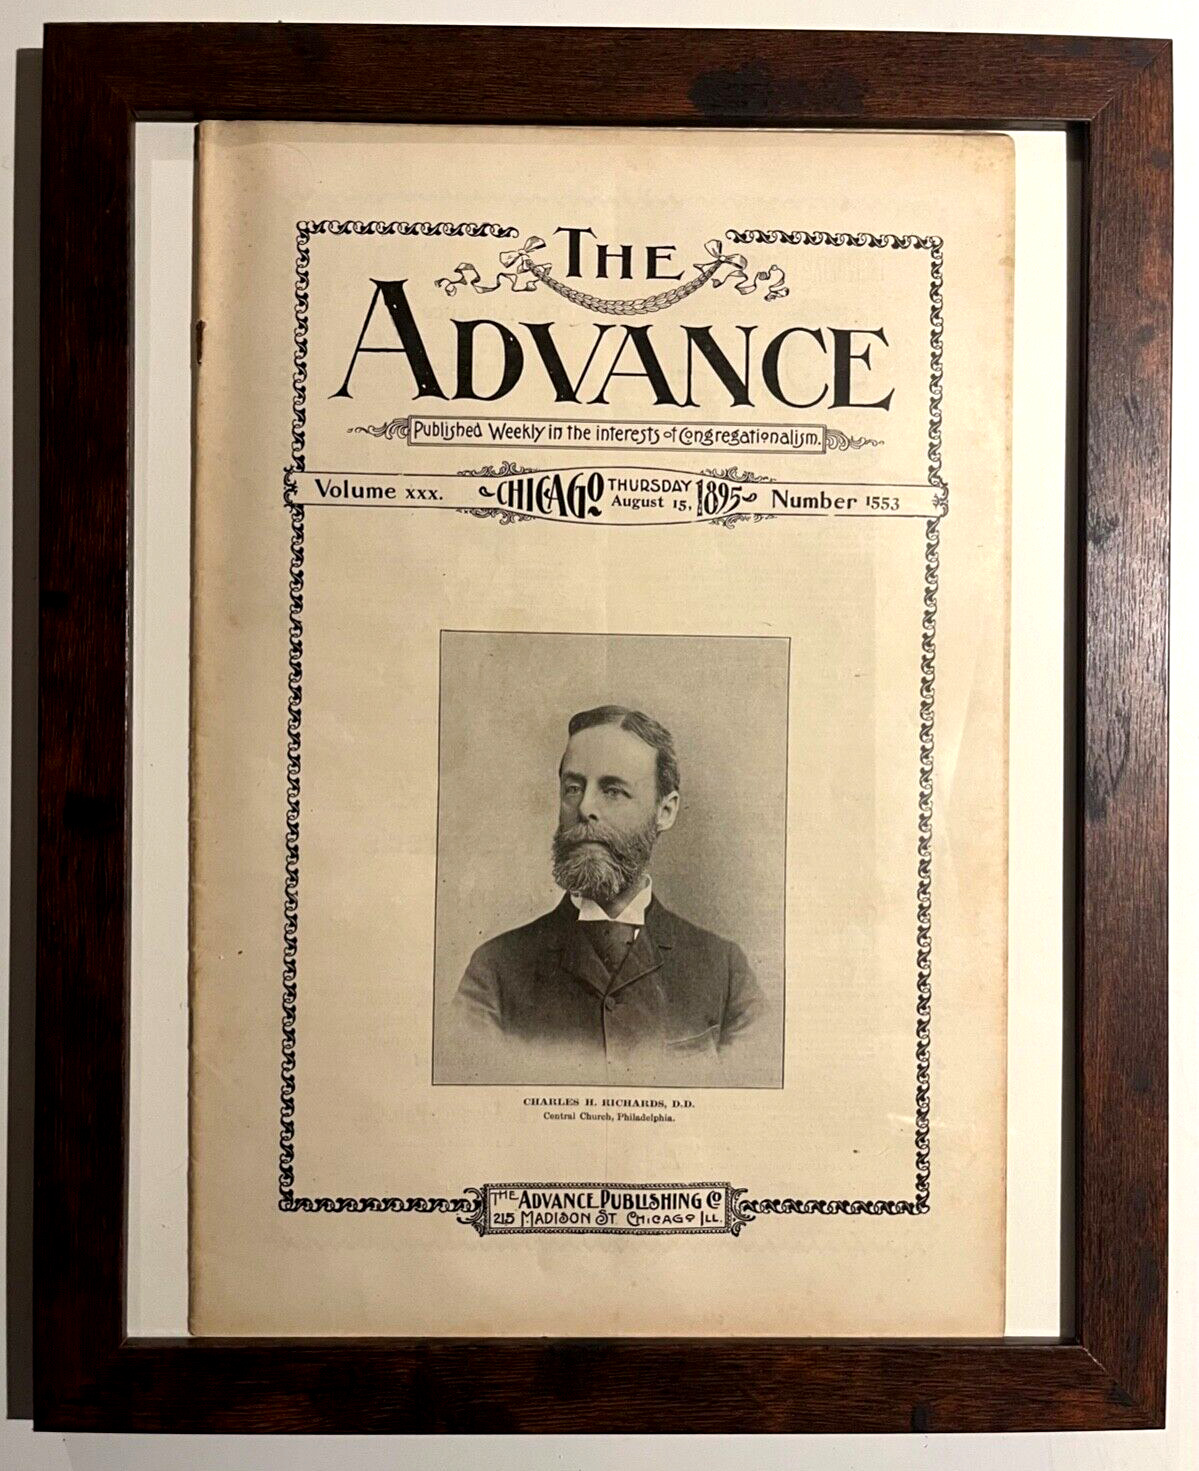 THE ADVANCE -August 15, 1895 - Chicago Newspaper Number 1553 - Complete & Framed